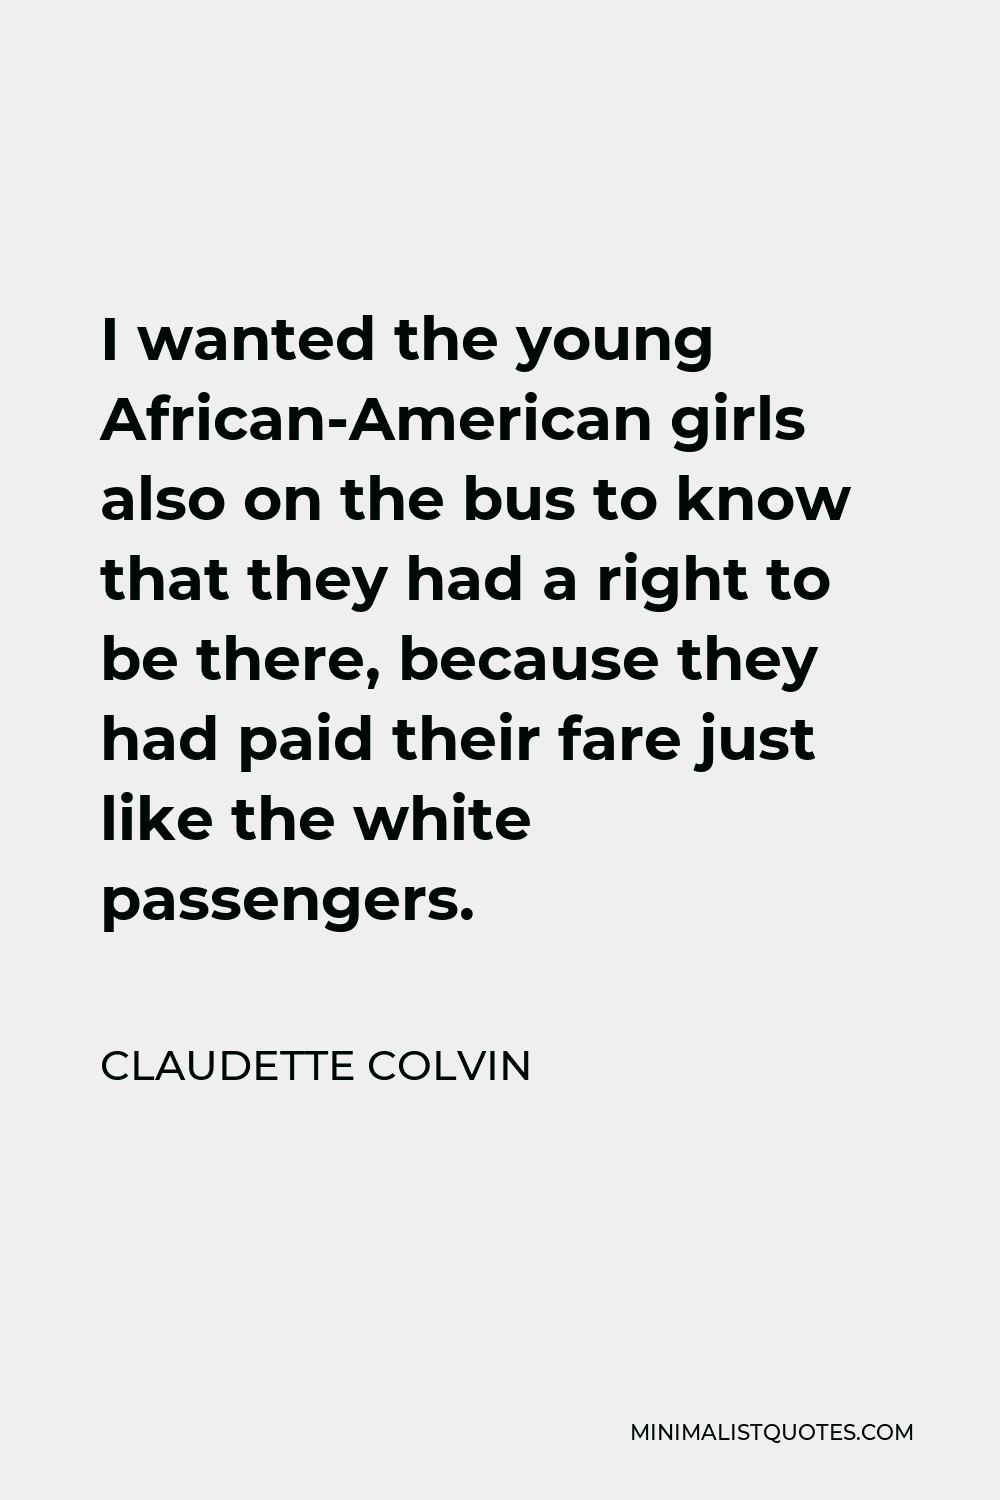 Claudette Colvin Quote - I wanted the young African-American girls also on the bus to know that they had a right to be there, because they had paid their fare just like the white passengers.